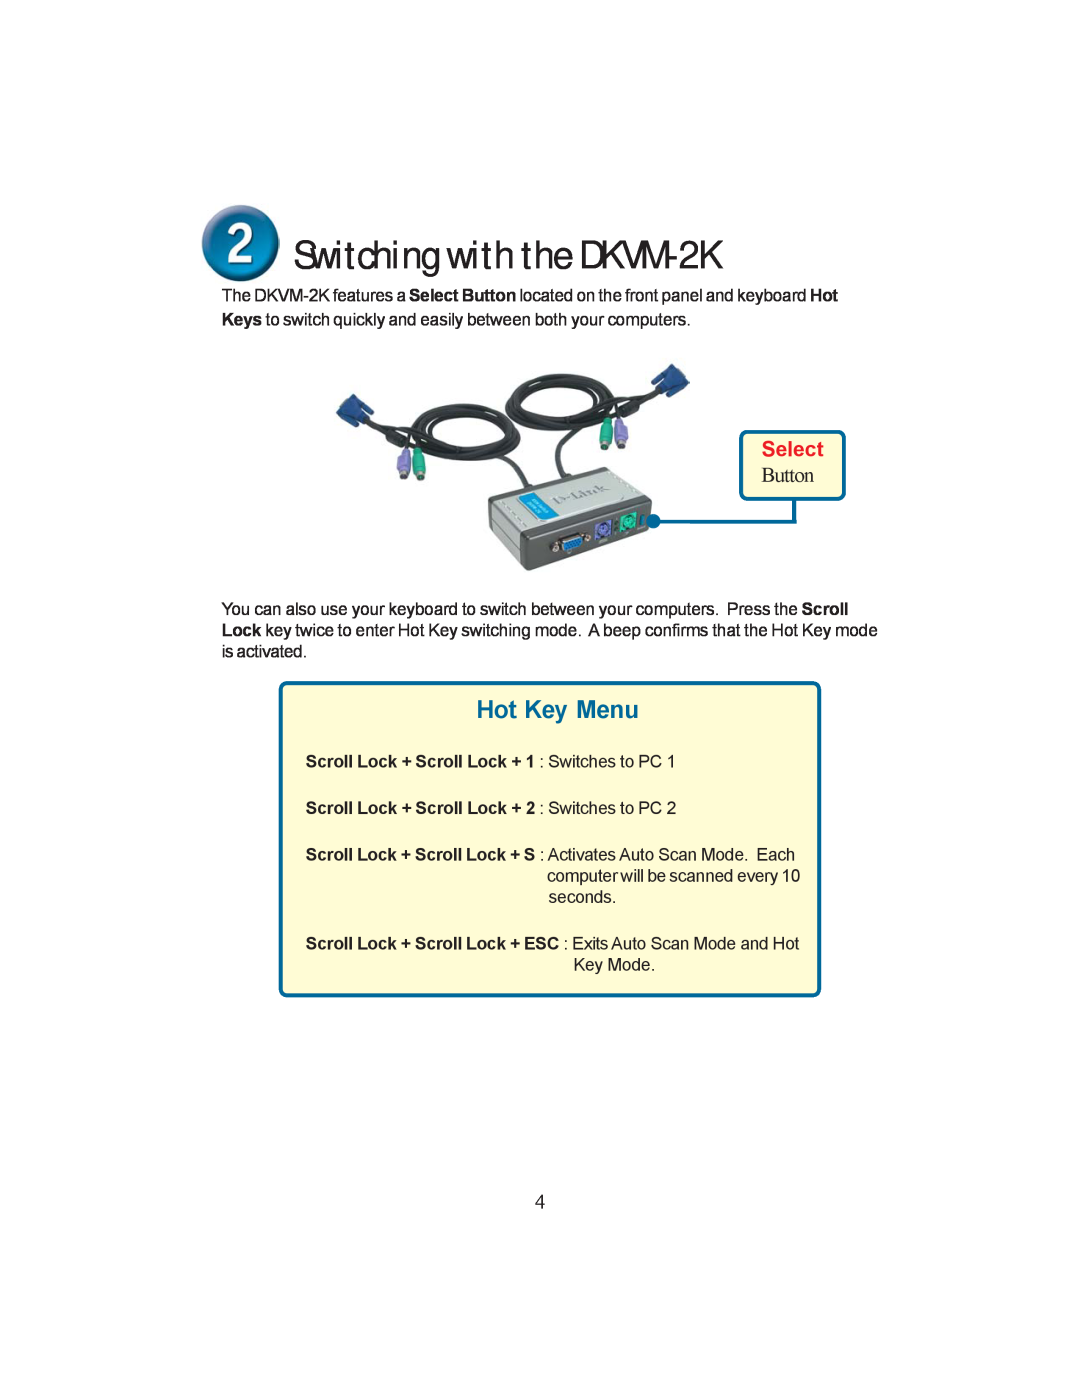 D-Link dkvm-2k specifications Switching with the DKVM-2K, Hot Key Menu, Select, Button 